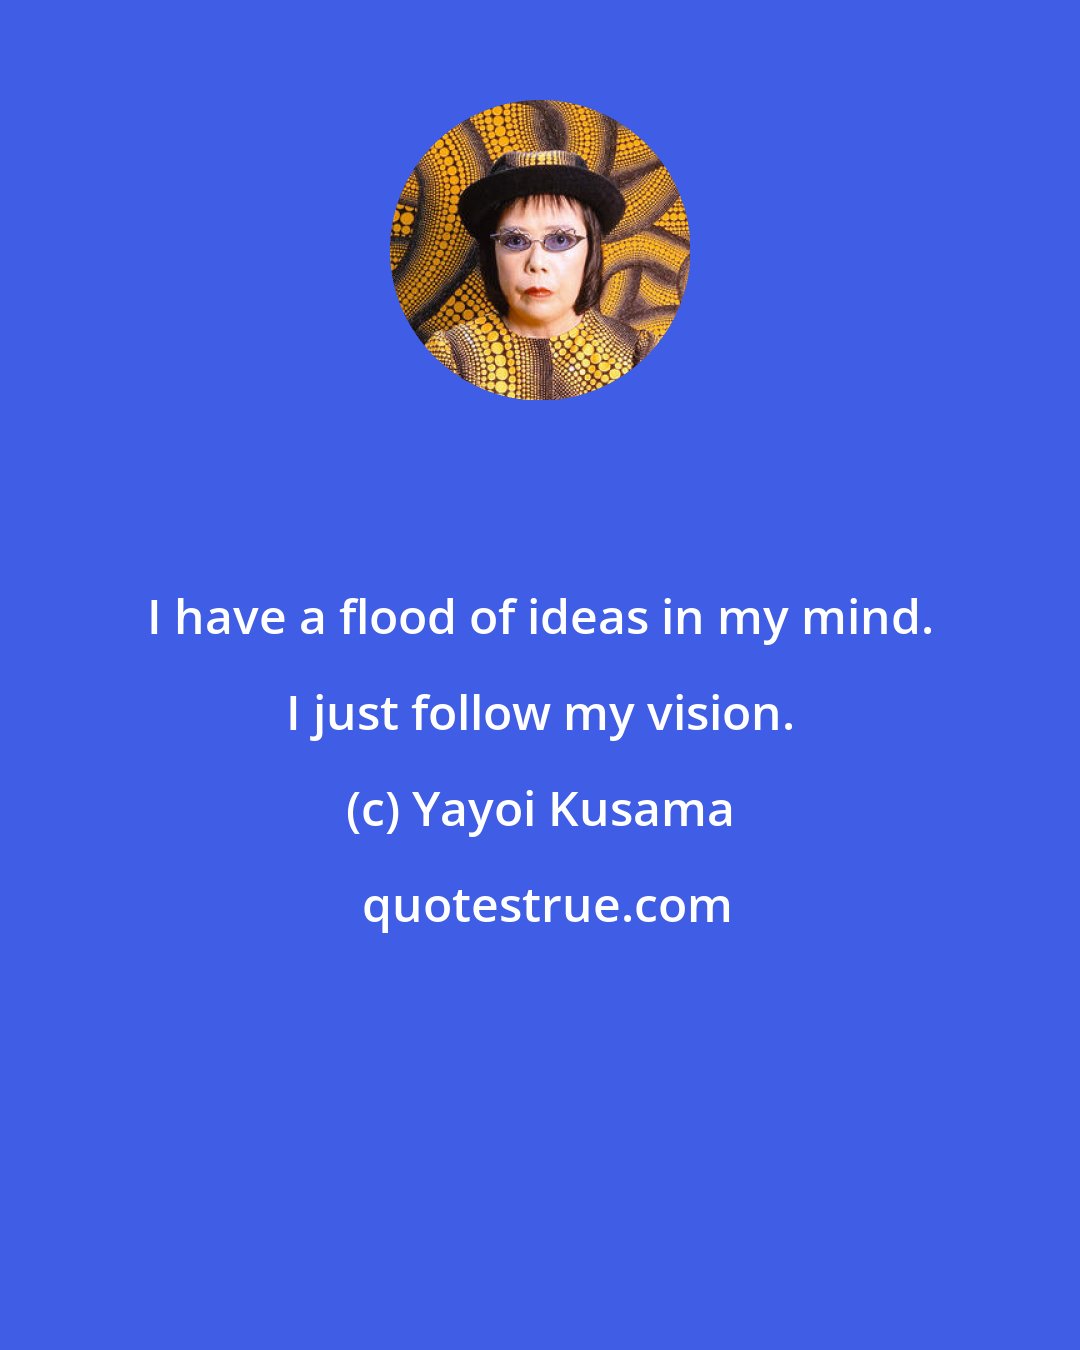 Yayoi Kusama: I have a flood of ideas in my mind. I just follow my vision.